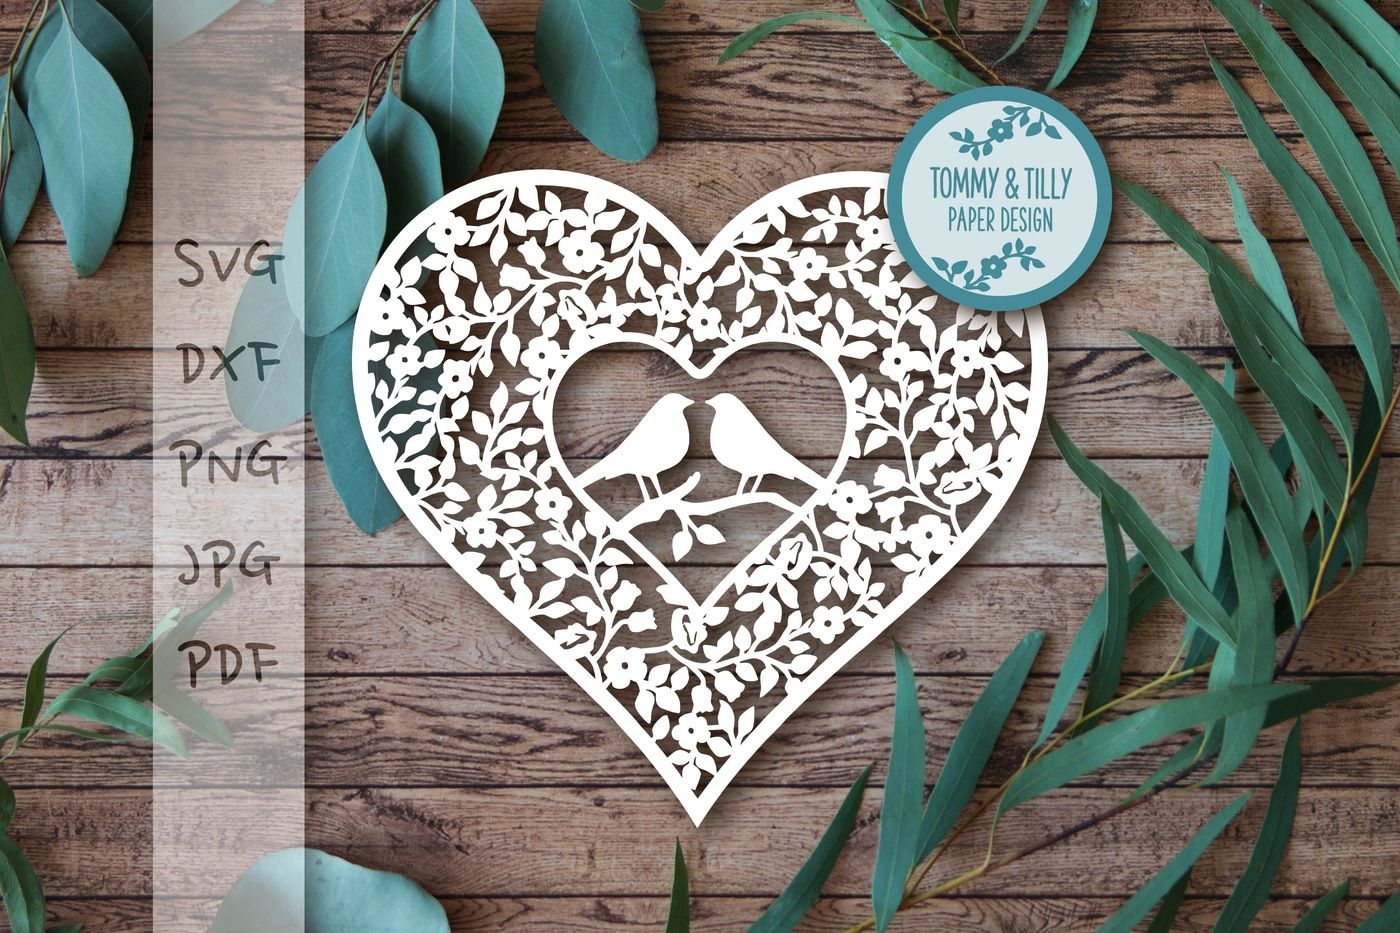 Download Love Bird Vintage Heart SVG DXF PNG PDF JPG By Tommy and ...